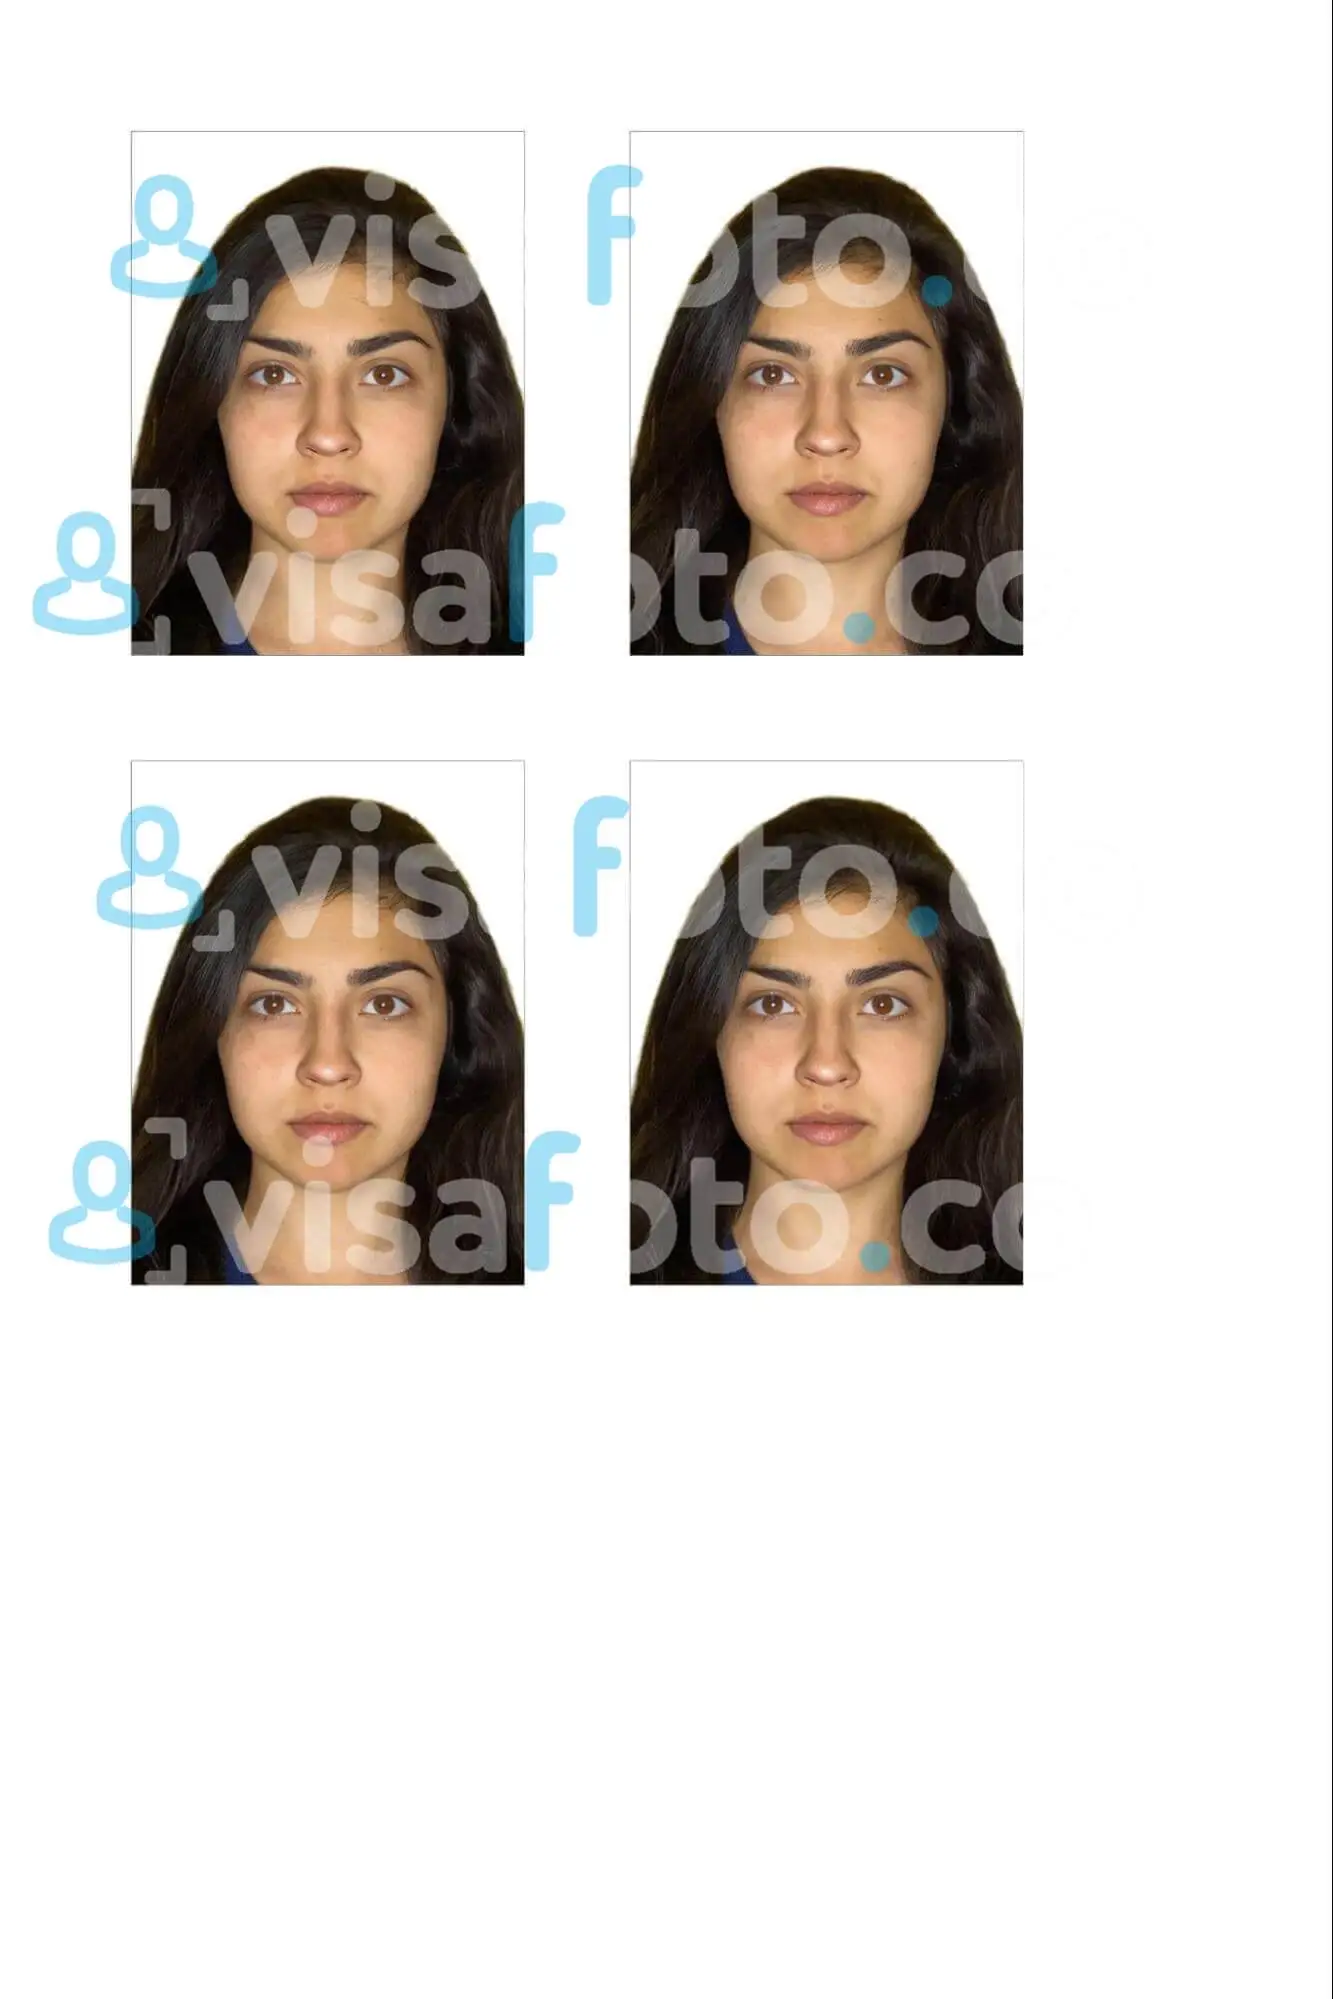 Mexican temporary resident visa photos for printing